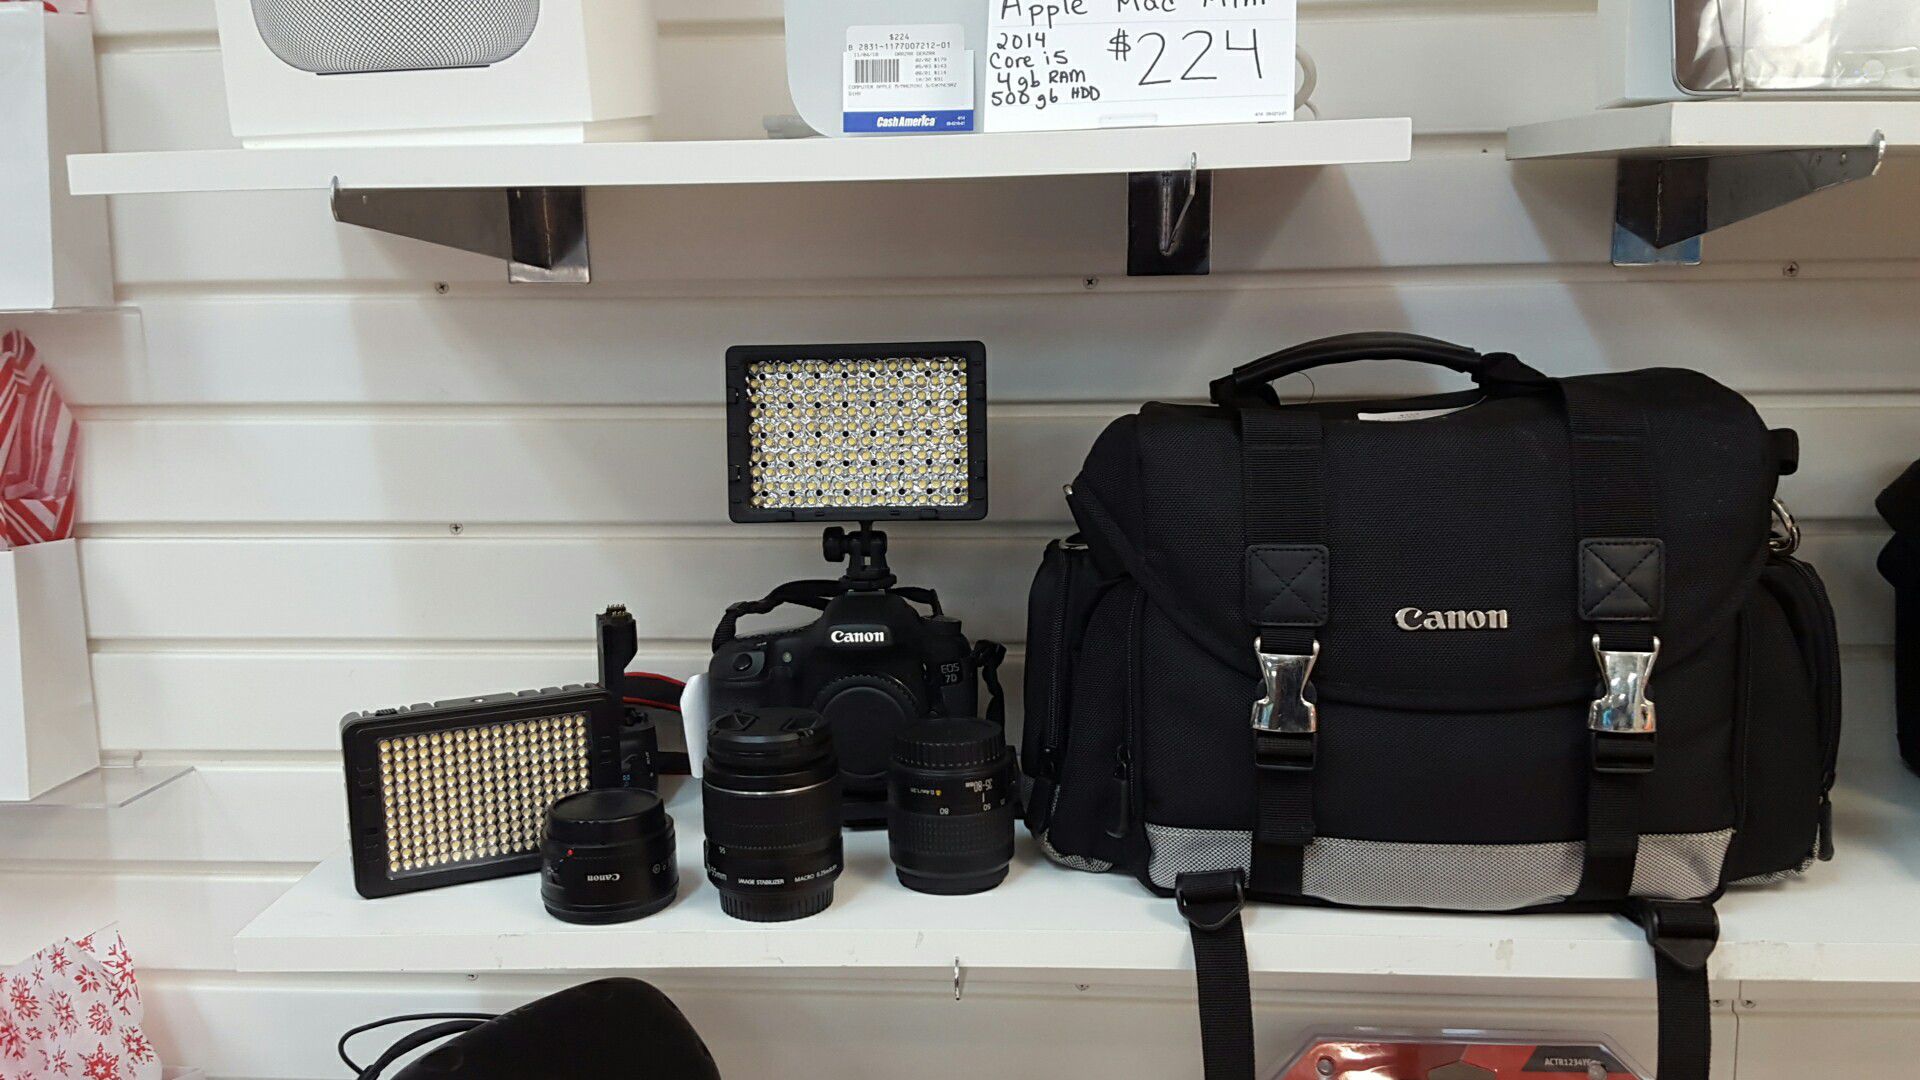 CANON CAMERA WITH EXTRA LENS, BATTERY, BAG